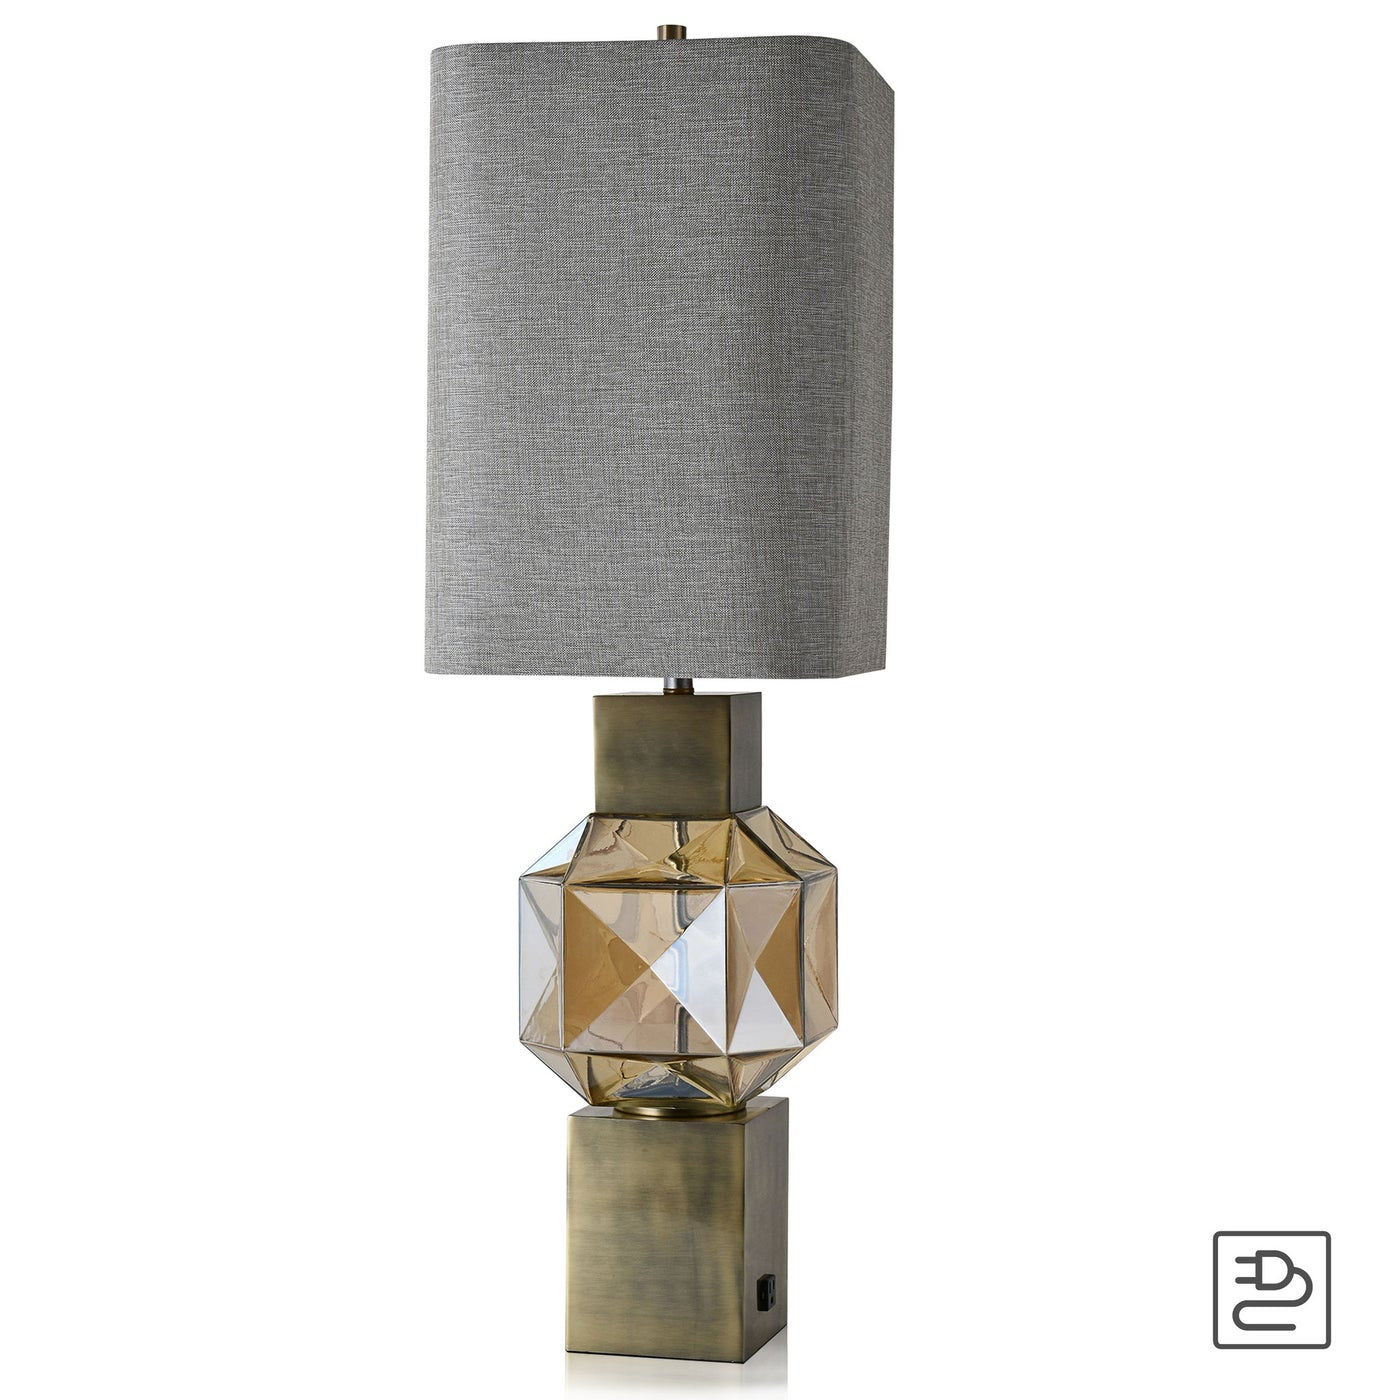 BEVERLY TABLE LAMP | Brass Finish on Glass Body with Antique Brass Finish on Metal Base | Hardback S